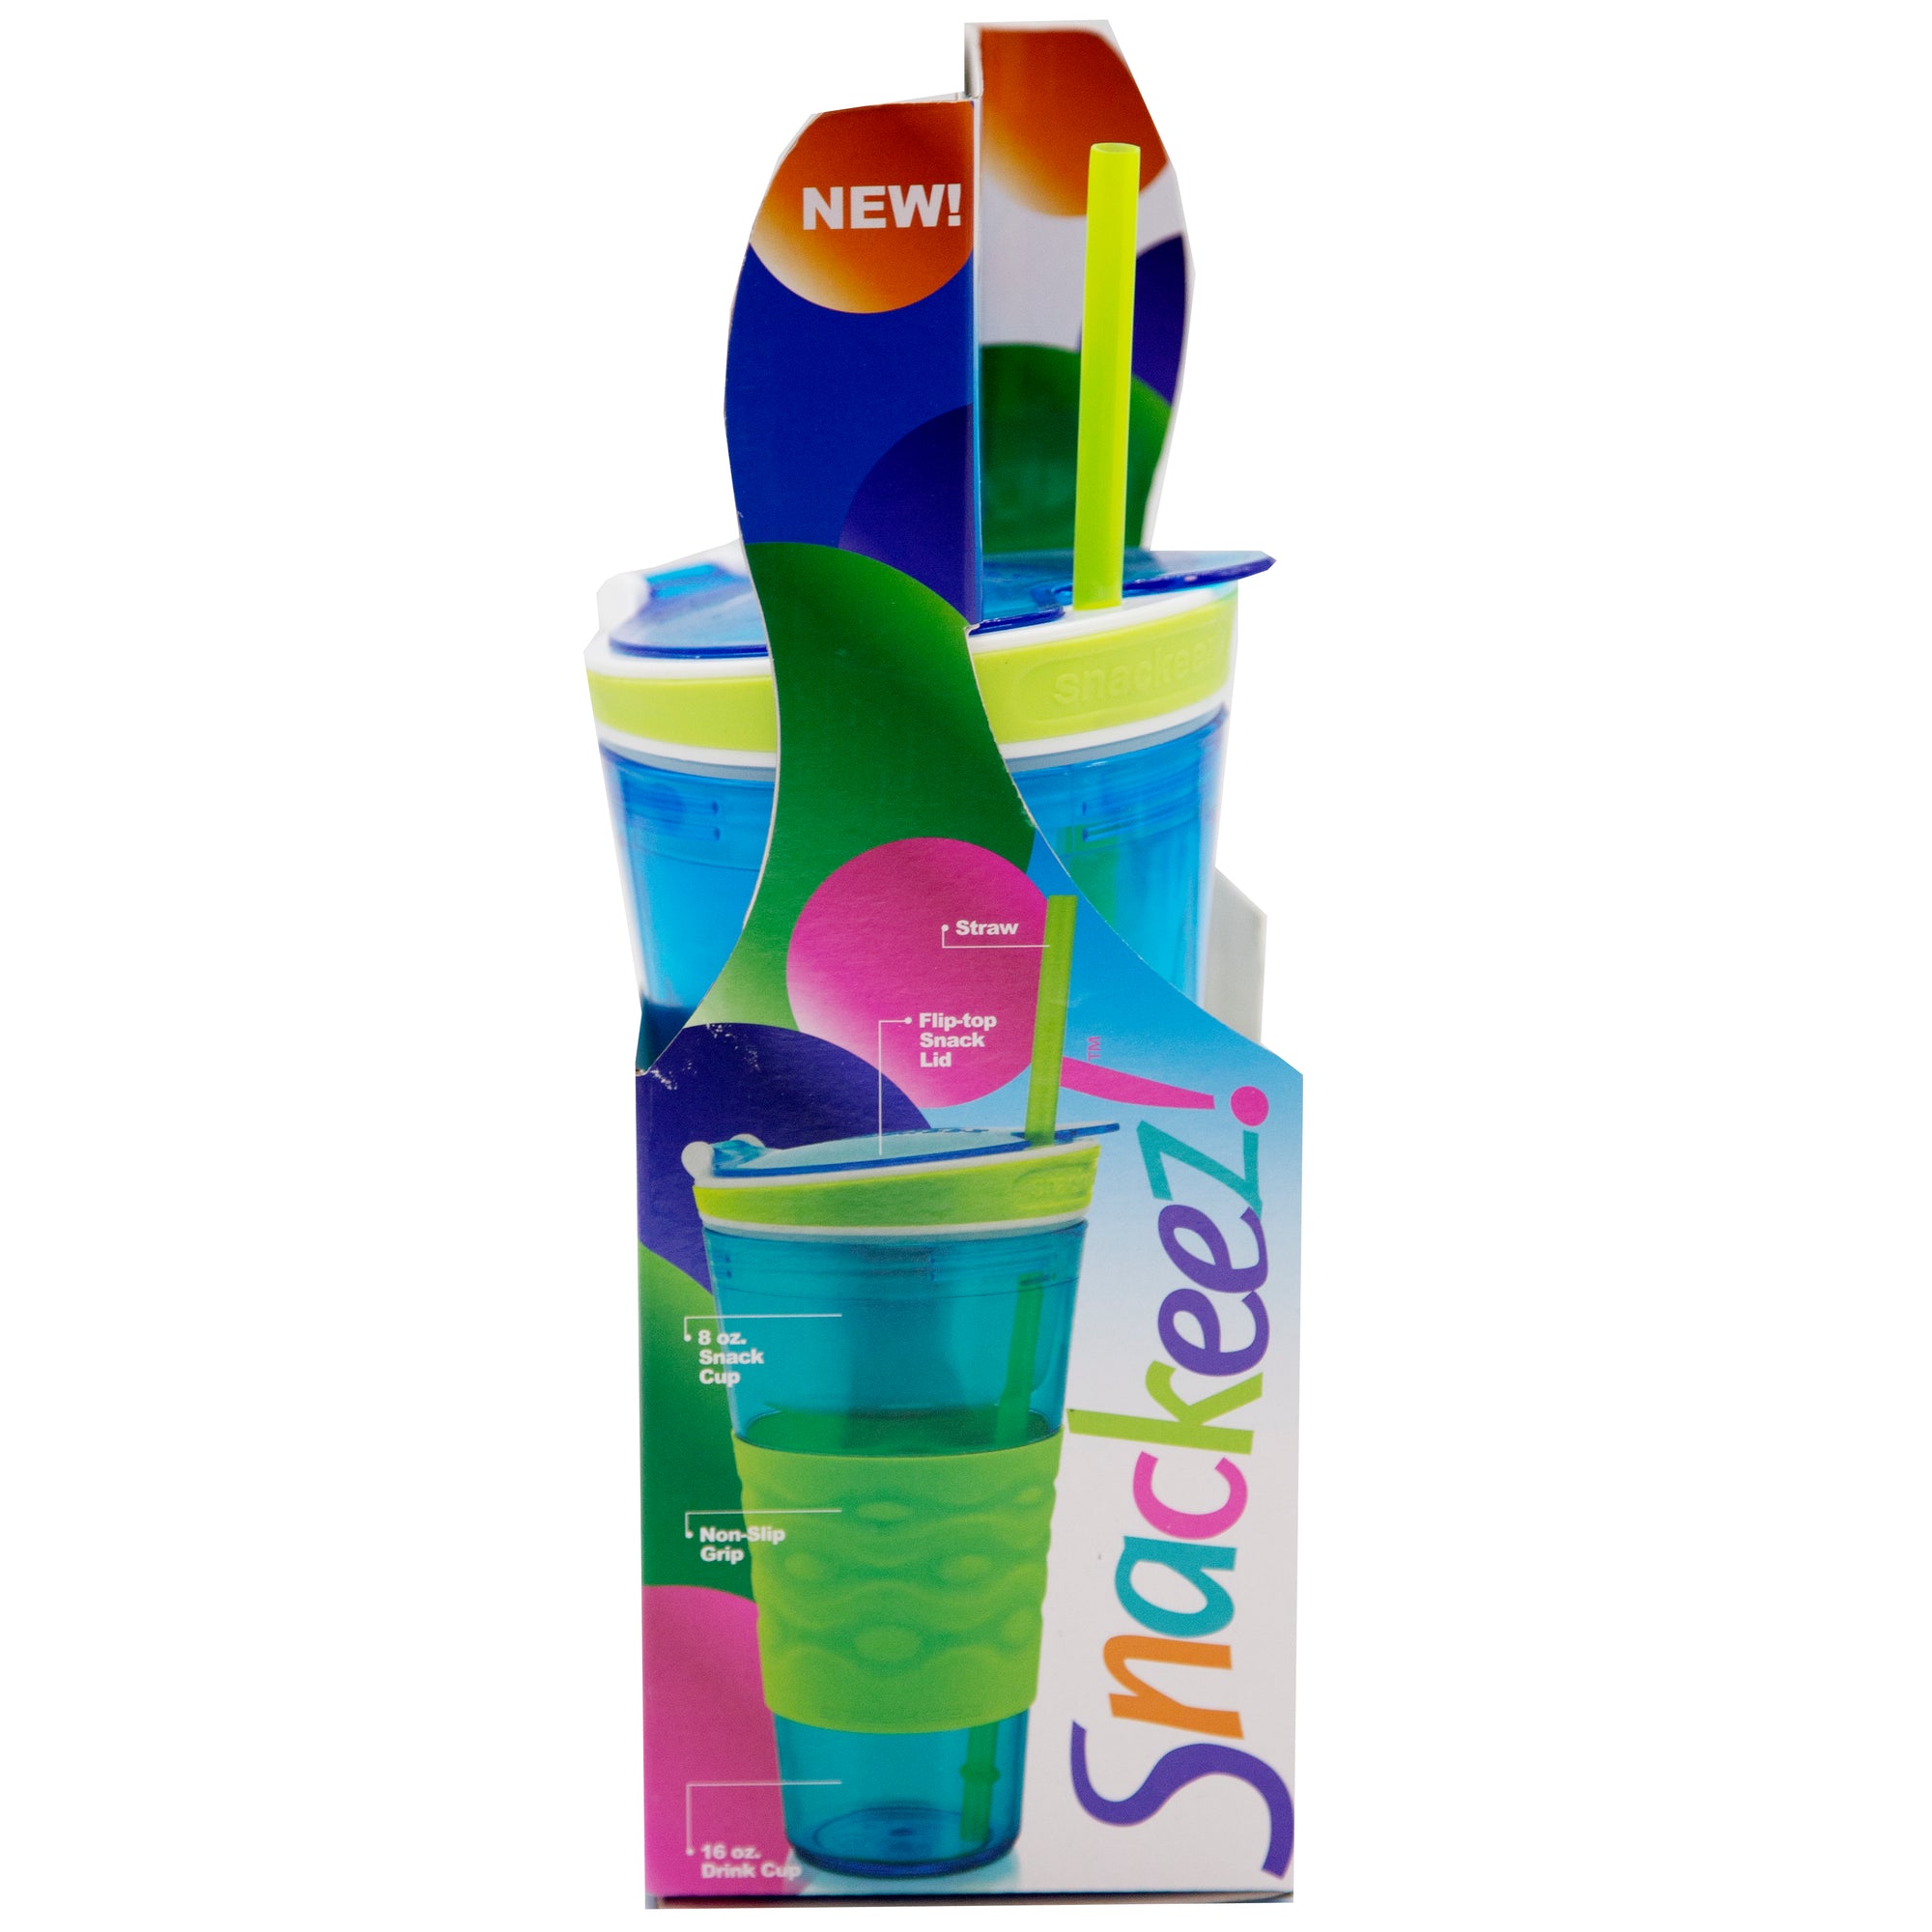 Snackeez 16 Oz Snack cup, 8 Oa7z snack cups Blue Plastic, Green Grip. Set  Of 3